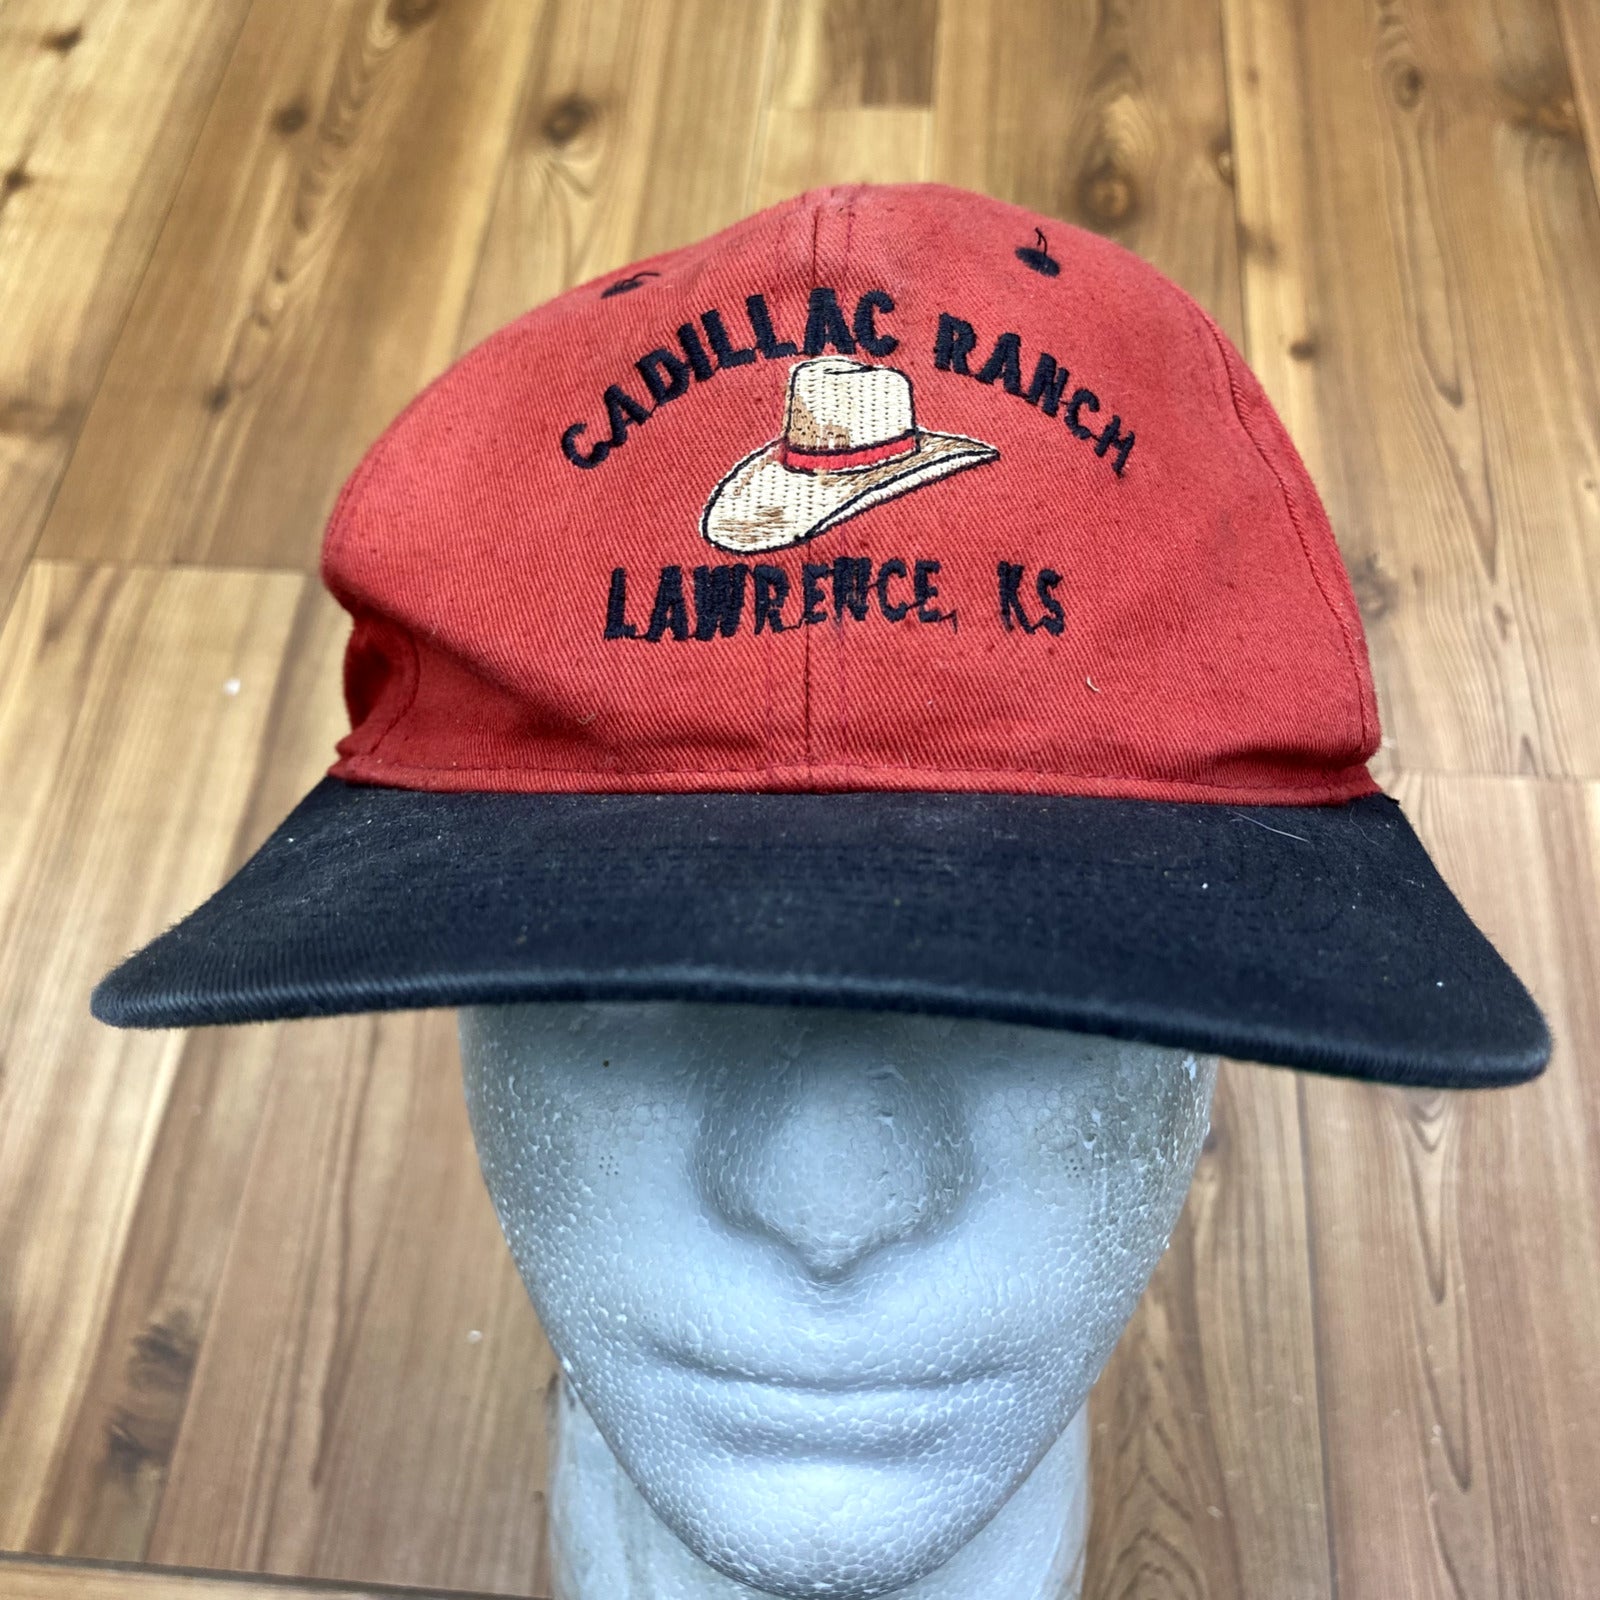 Vintage Red Cadillac Ranch Lawrence KS Cowboy Embroidered Snapback Hat Adult OS